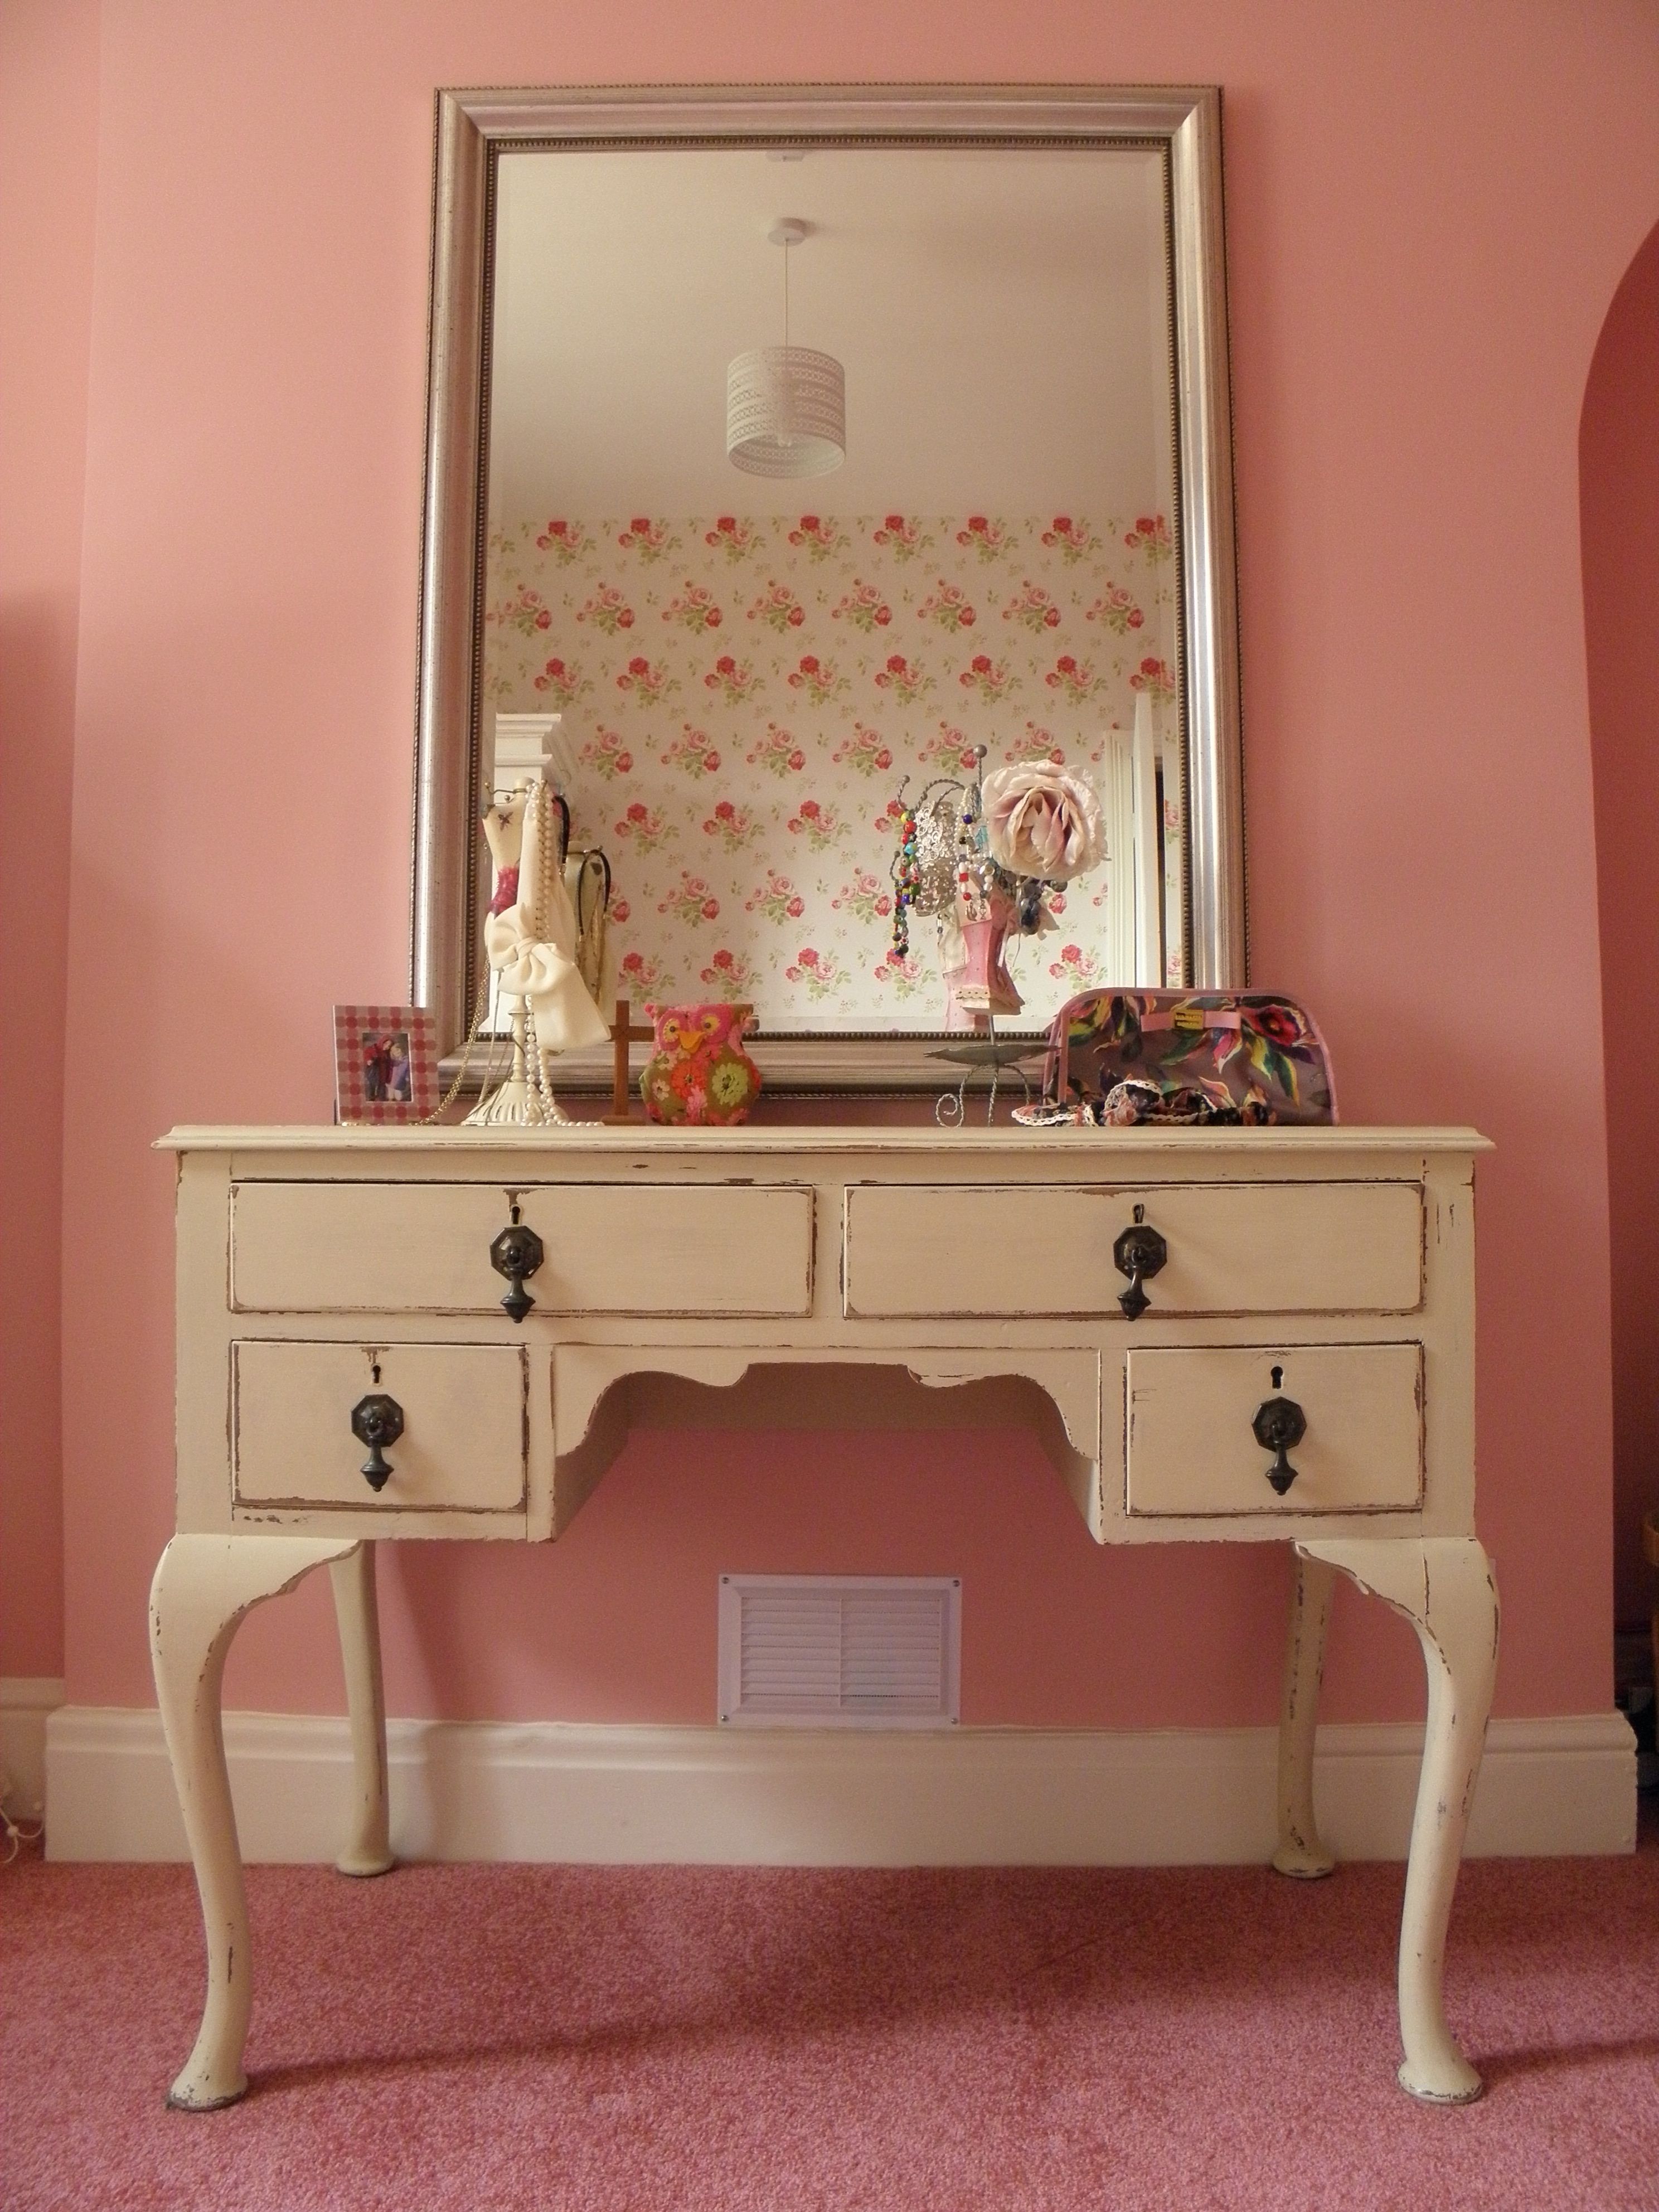 Lovely White Wooden Single Mirror Dressing Tables With Rustic With Regard To Decorative Dressing Table Mirrors (View 7 of 15)